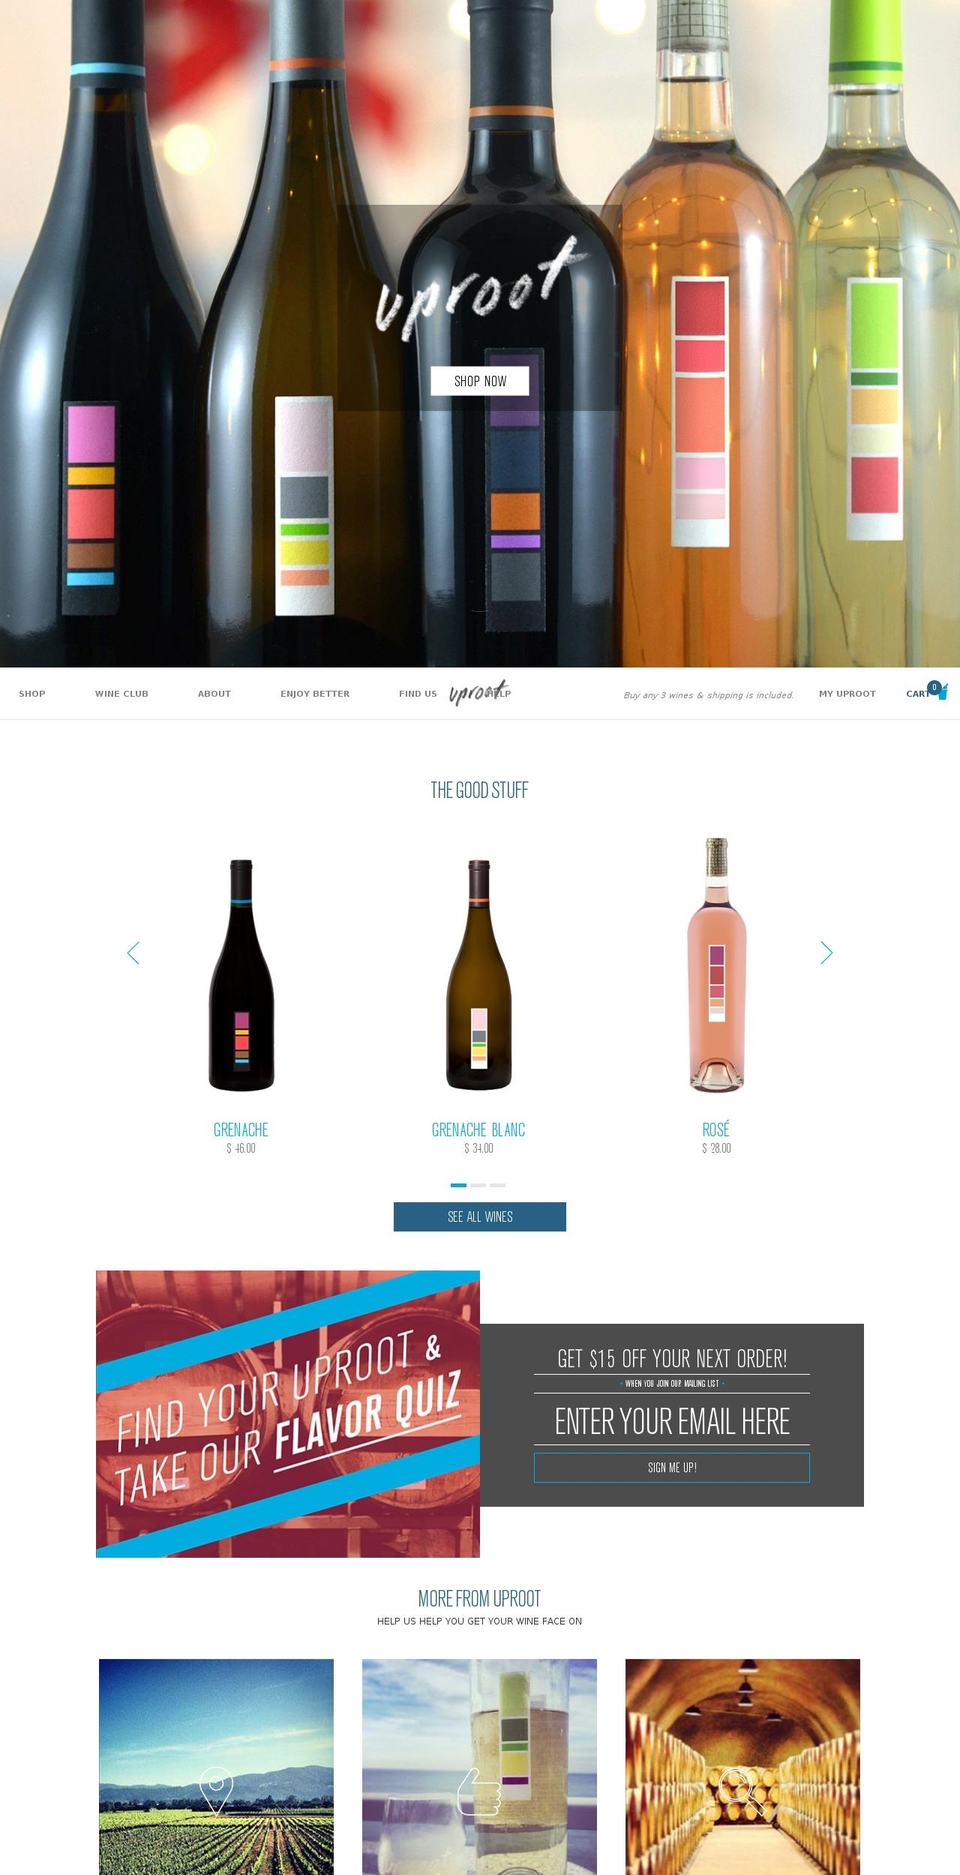 uproot-dev-myshopify-com-vpvuproot Shopify theme site example corked.wine